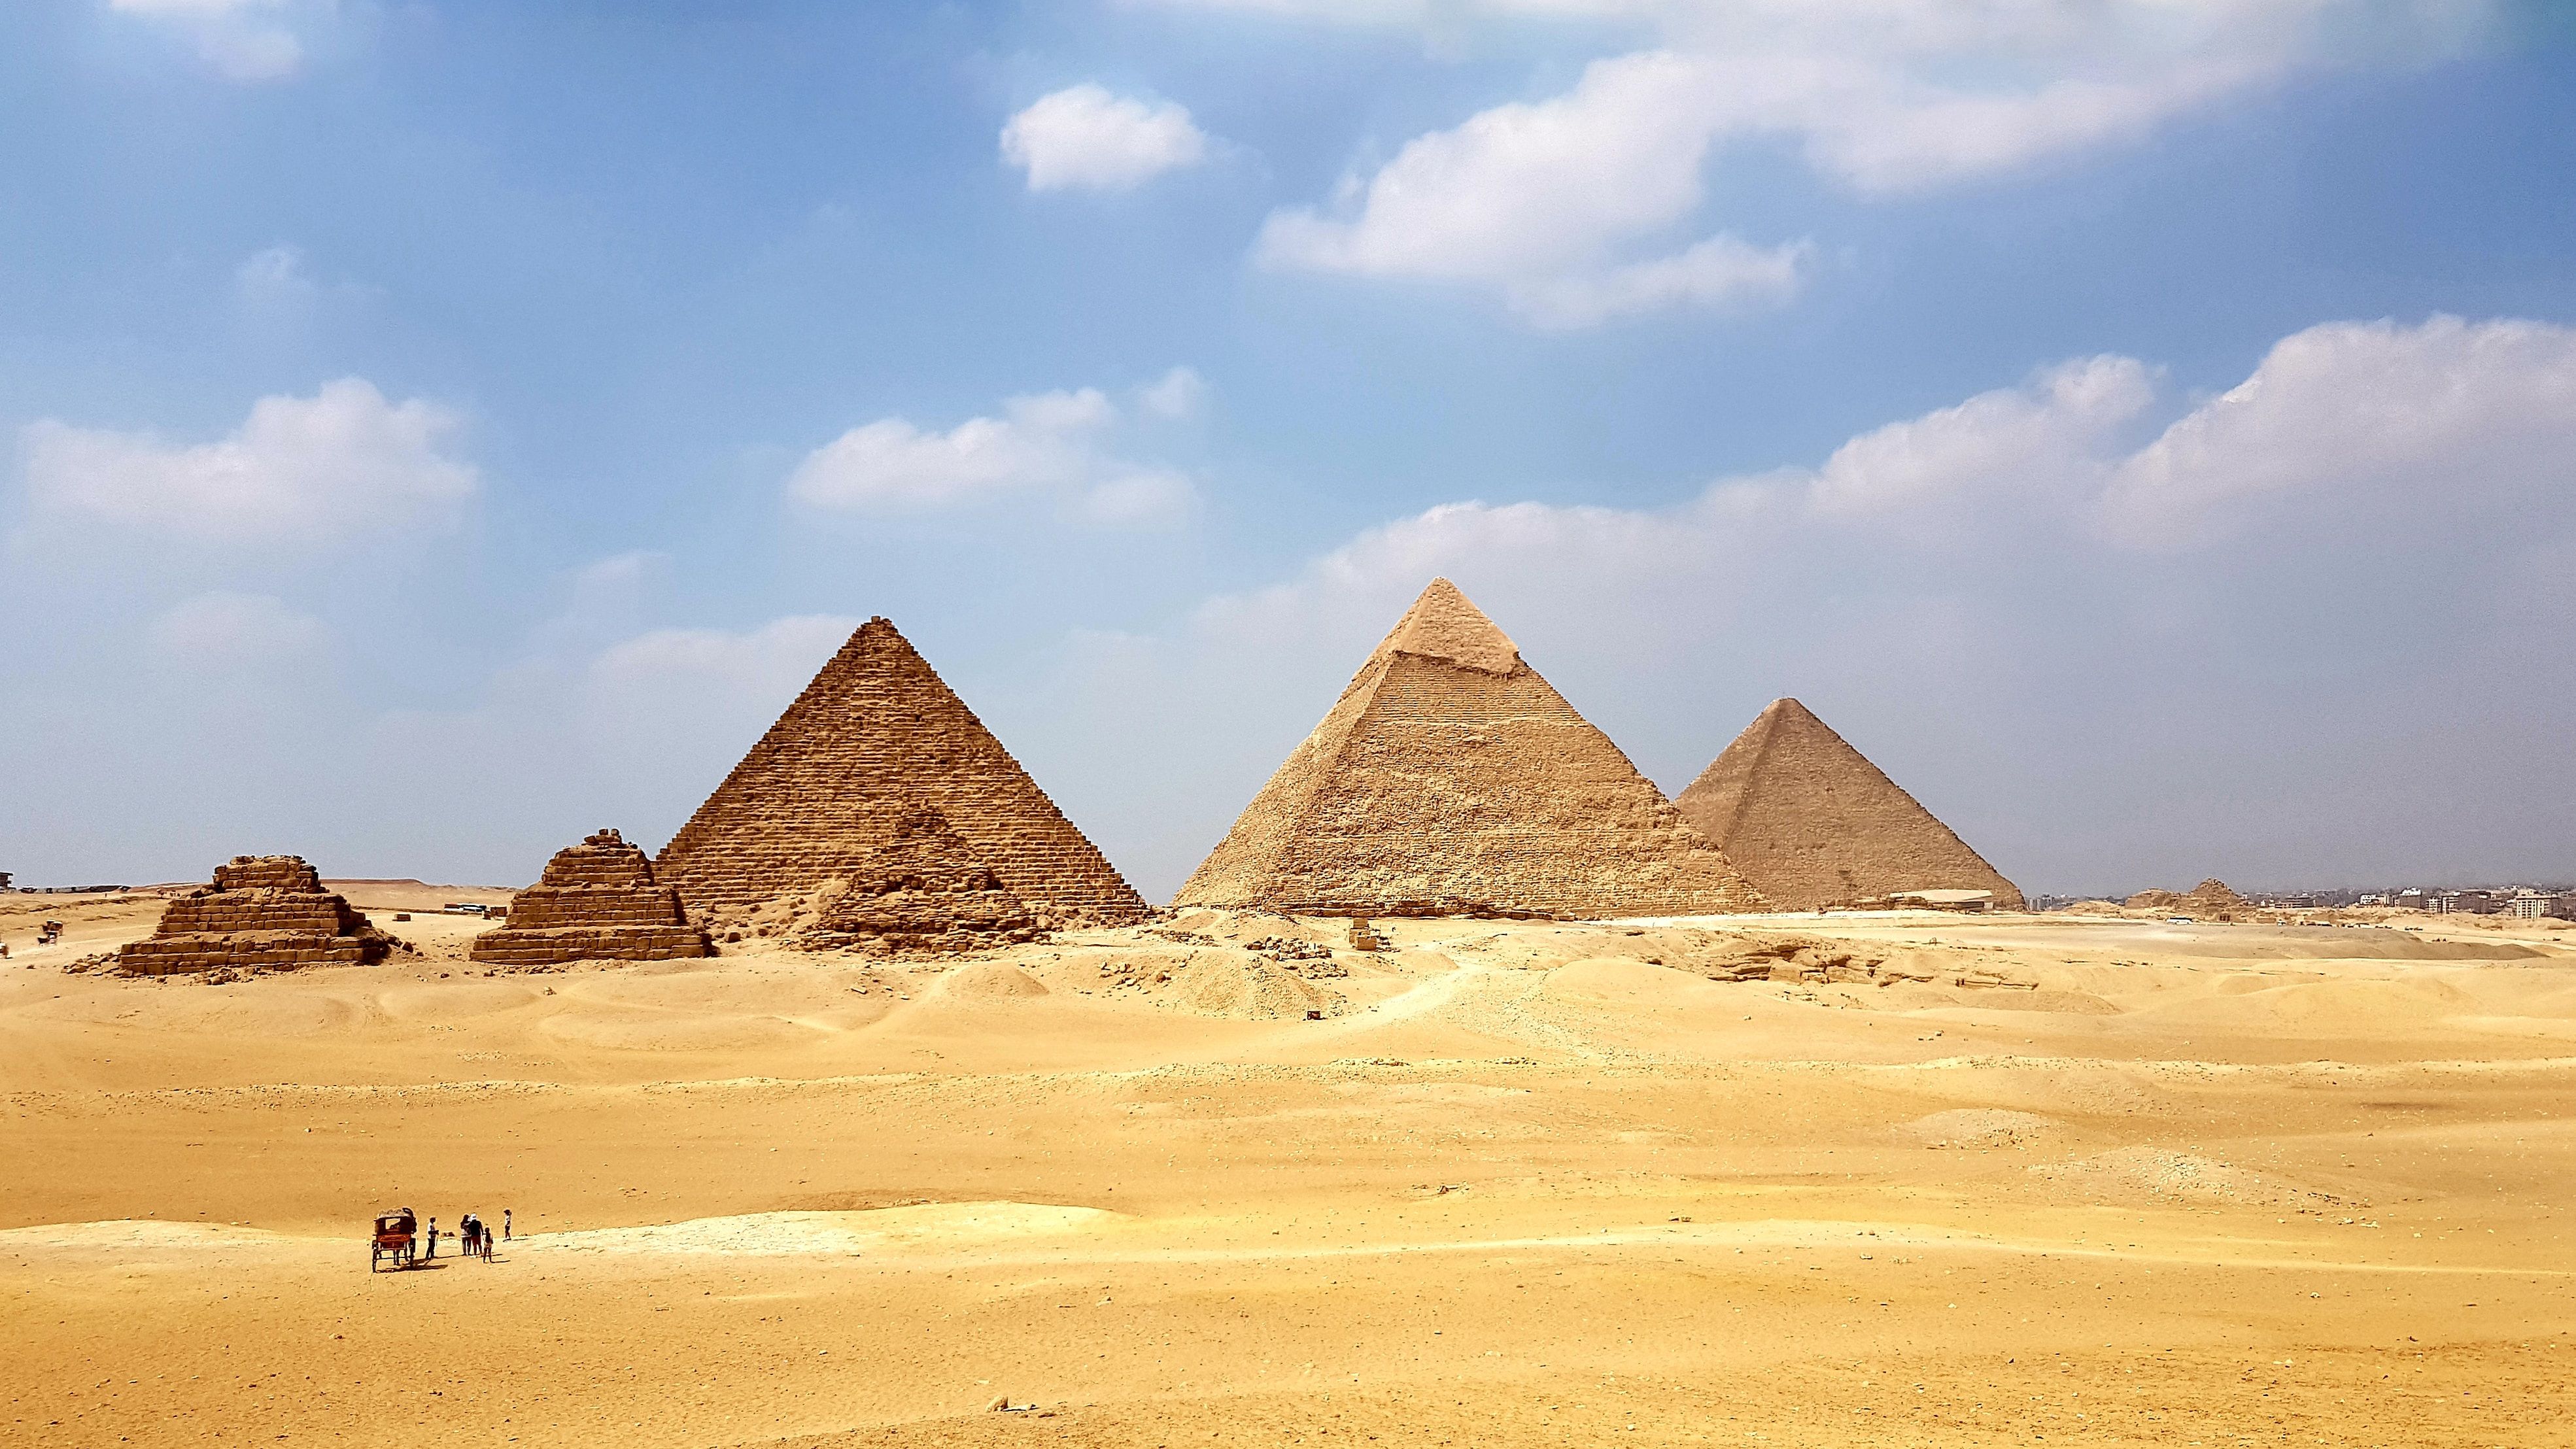 The six Pyramids of Giza in Egypt